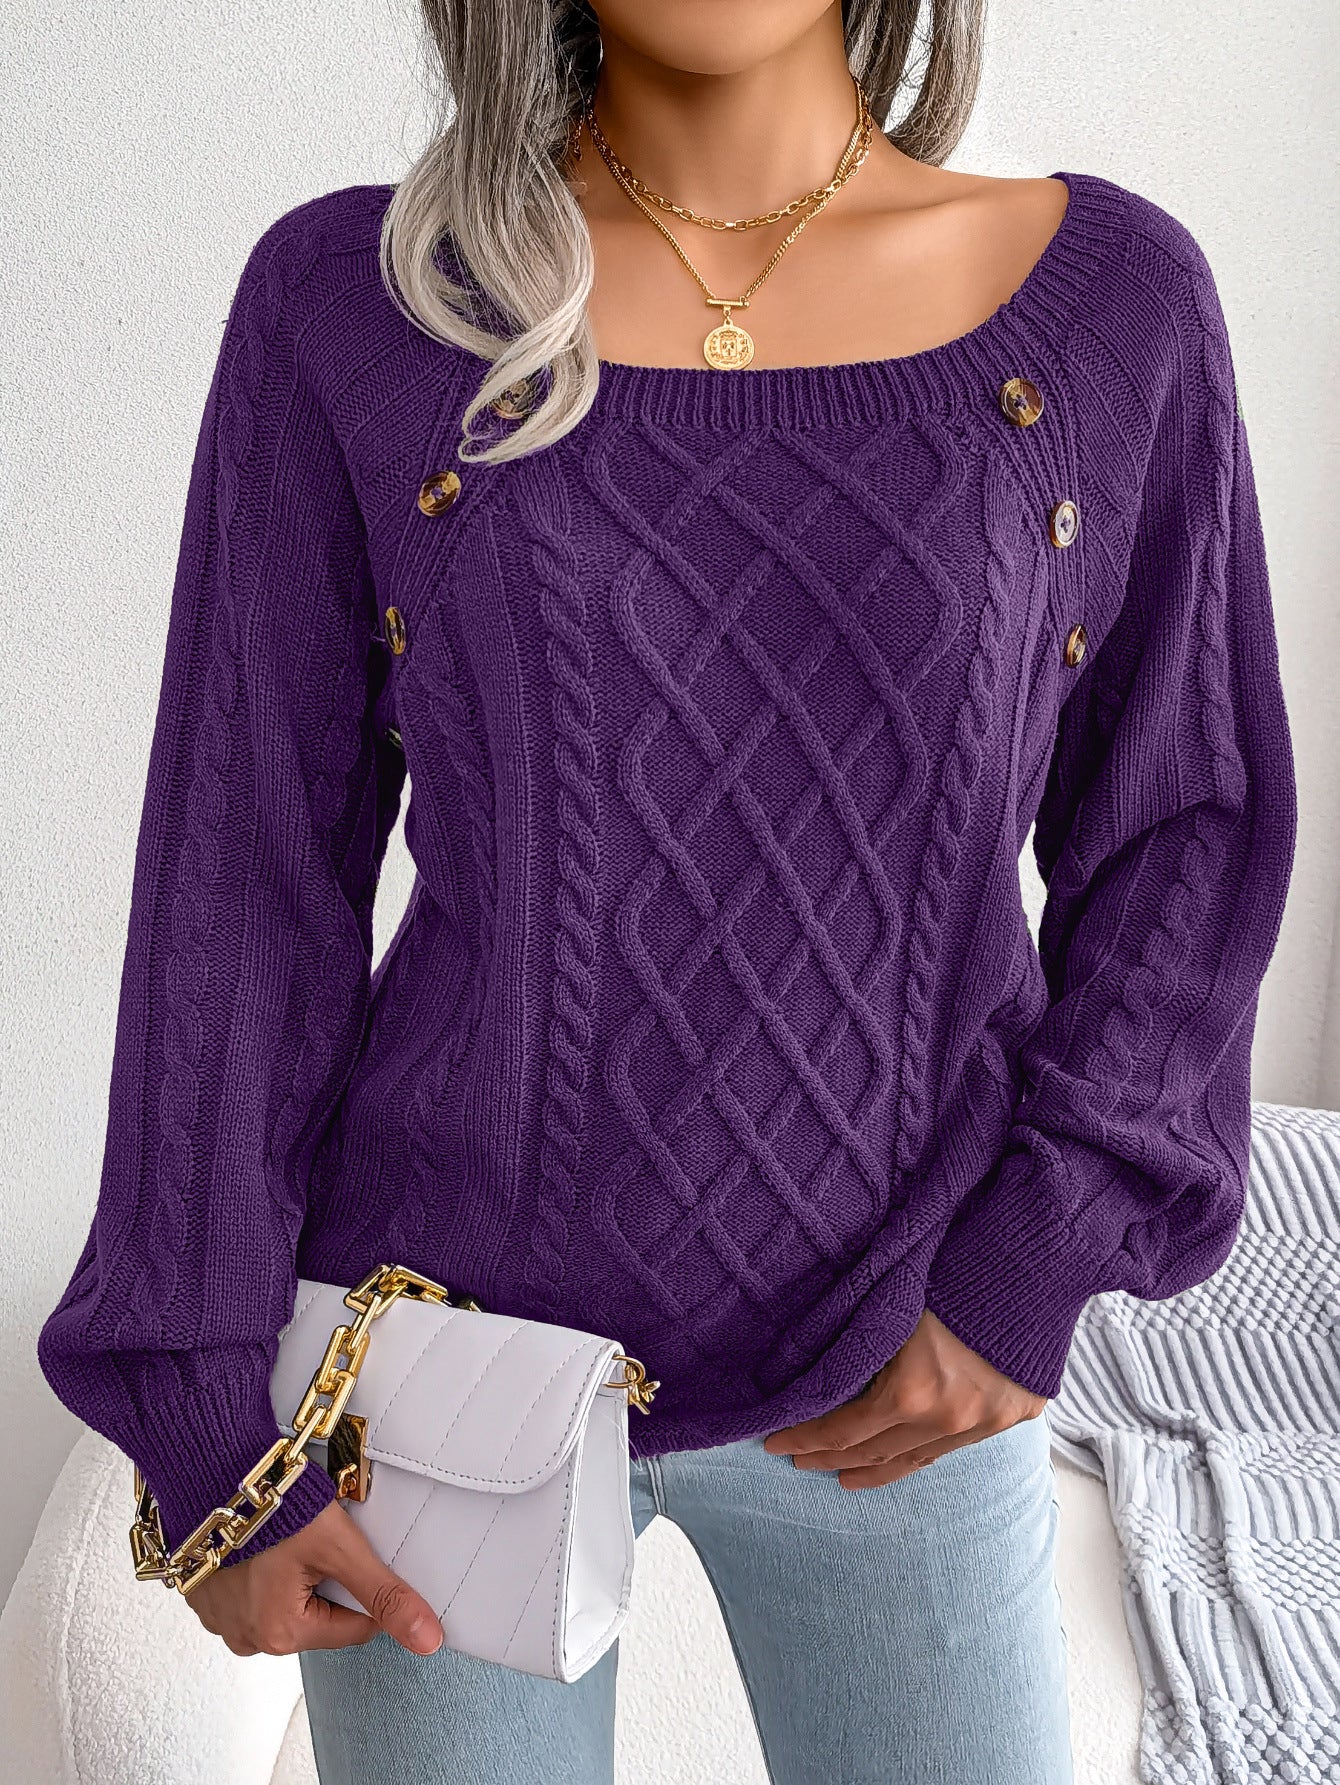 Sweater - Square Neck Button-Up Twisted Knit Sweater purple